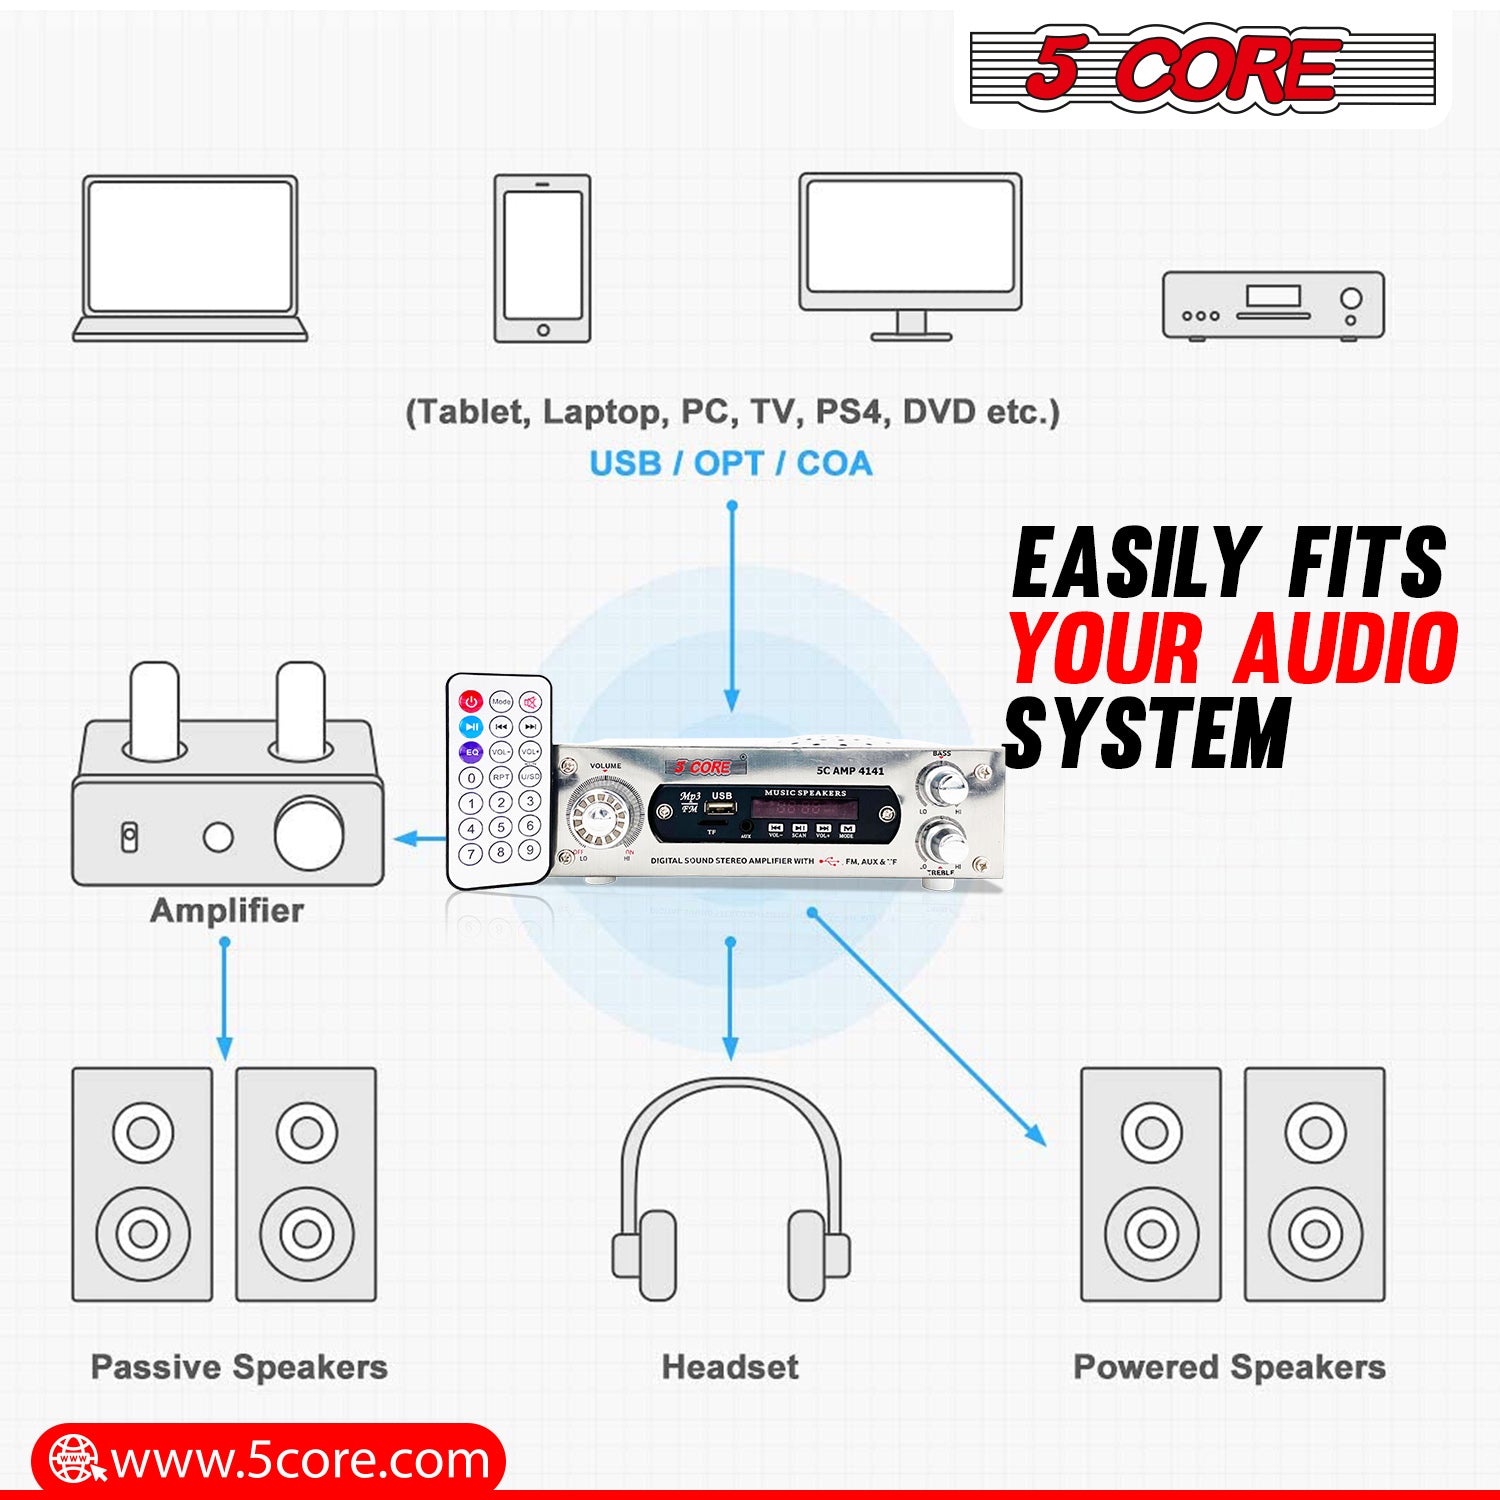 5Core Amplifier Home Audio 400W in-Built Speaker Mini Stereo Dual Channel LCD Display TF AUX USB